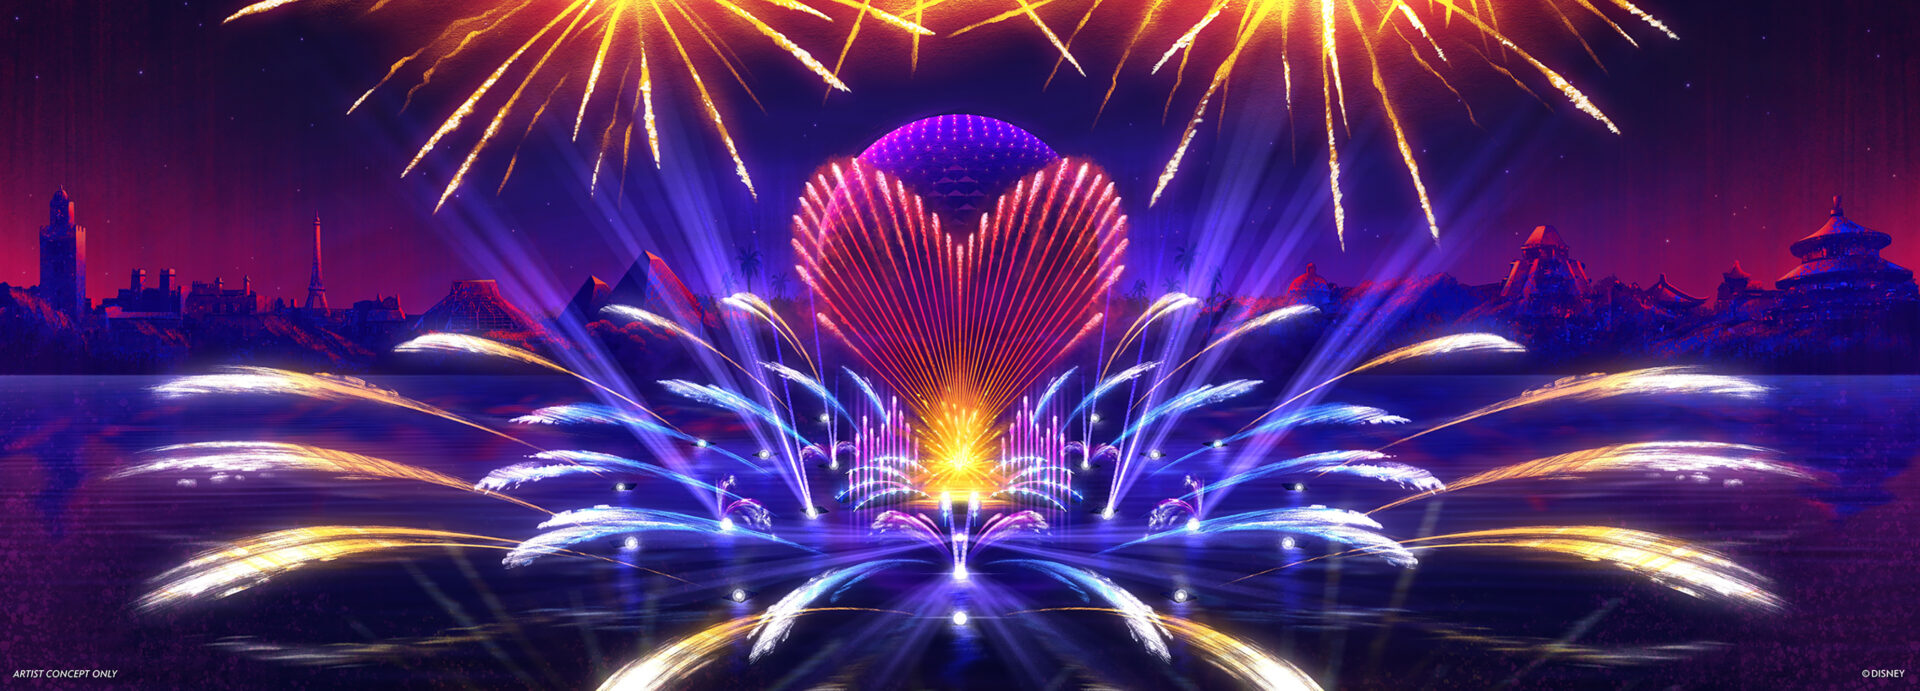 All New Nighttime Spectacular Coming to EPCOT in LATE 2023!